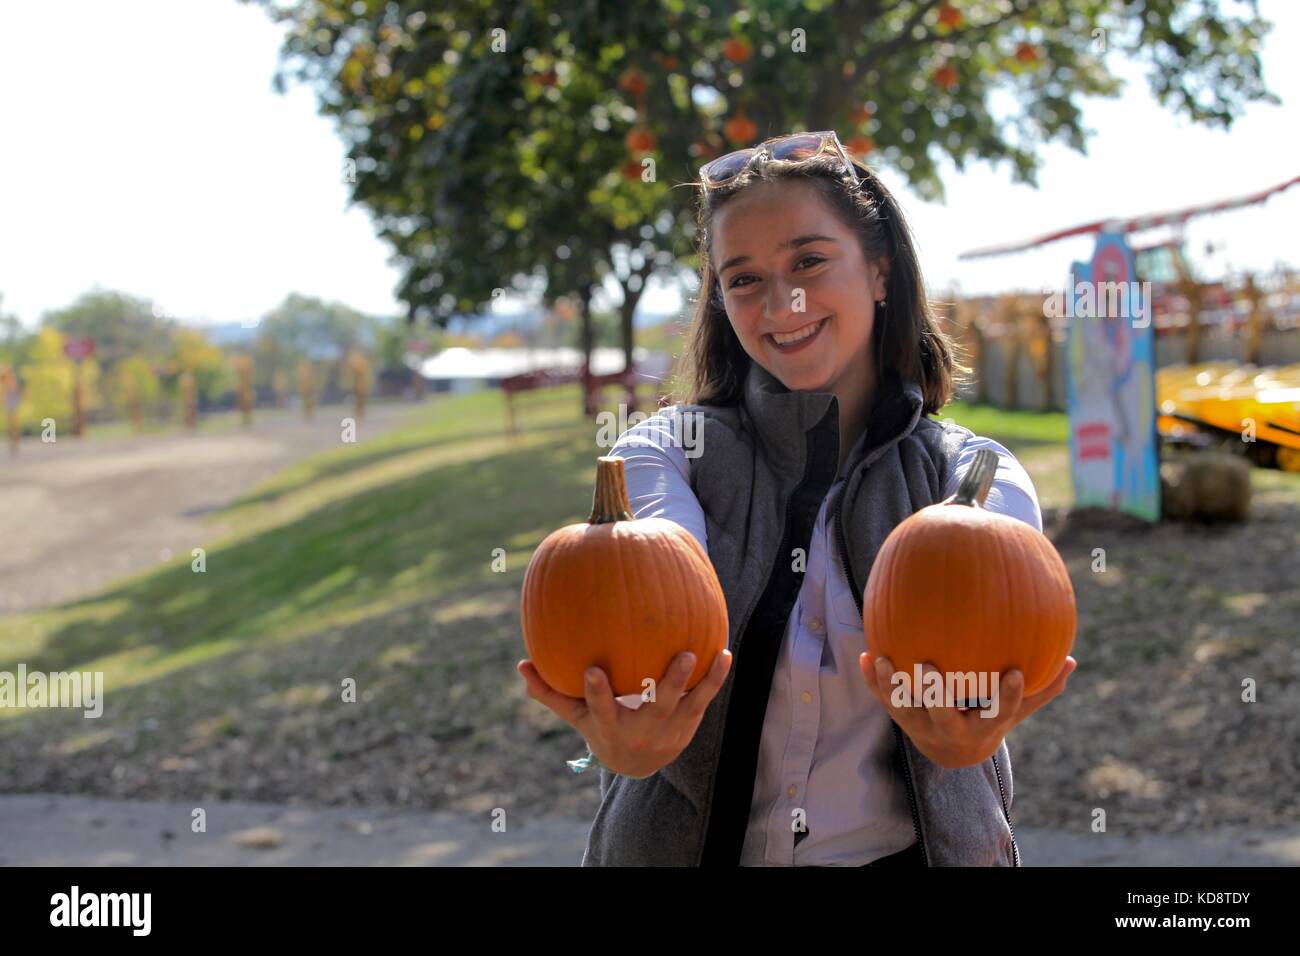 Women holding two small pumpkins on a farm Stock Photo